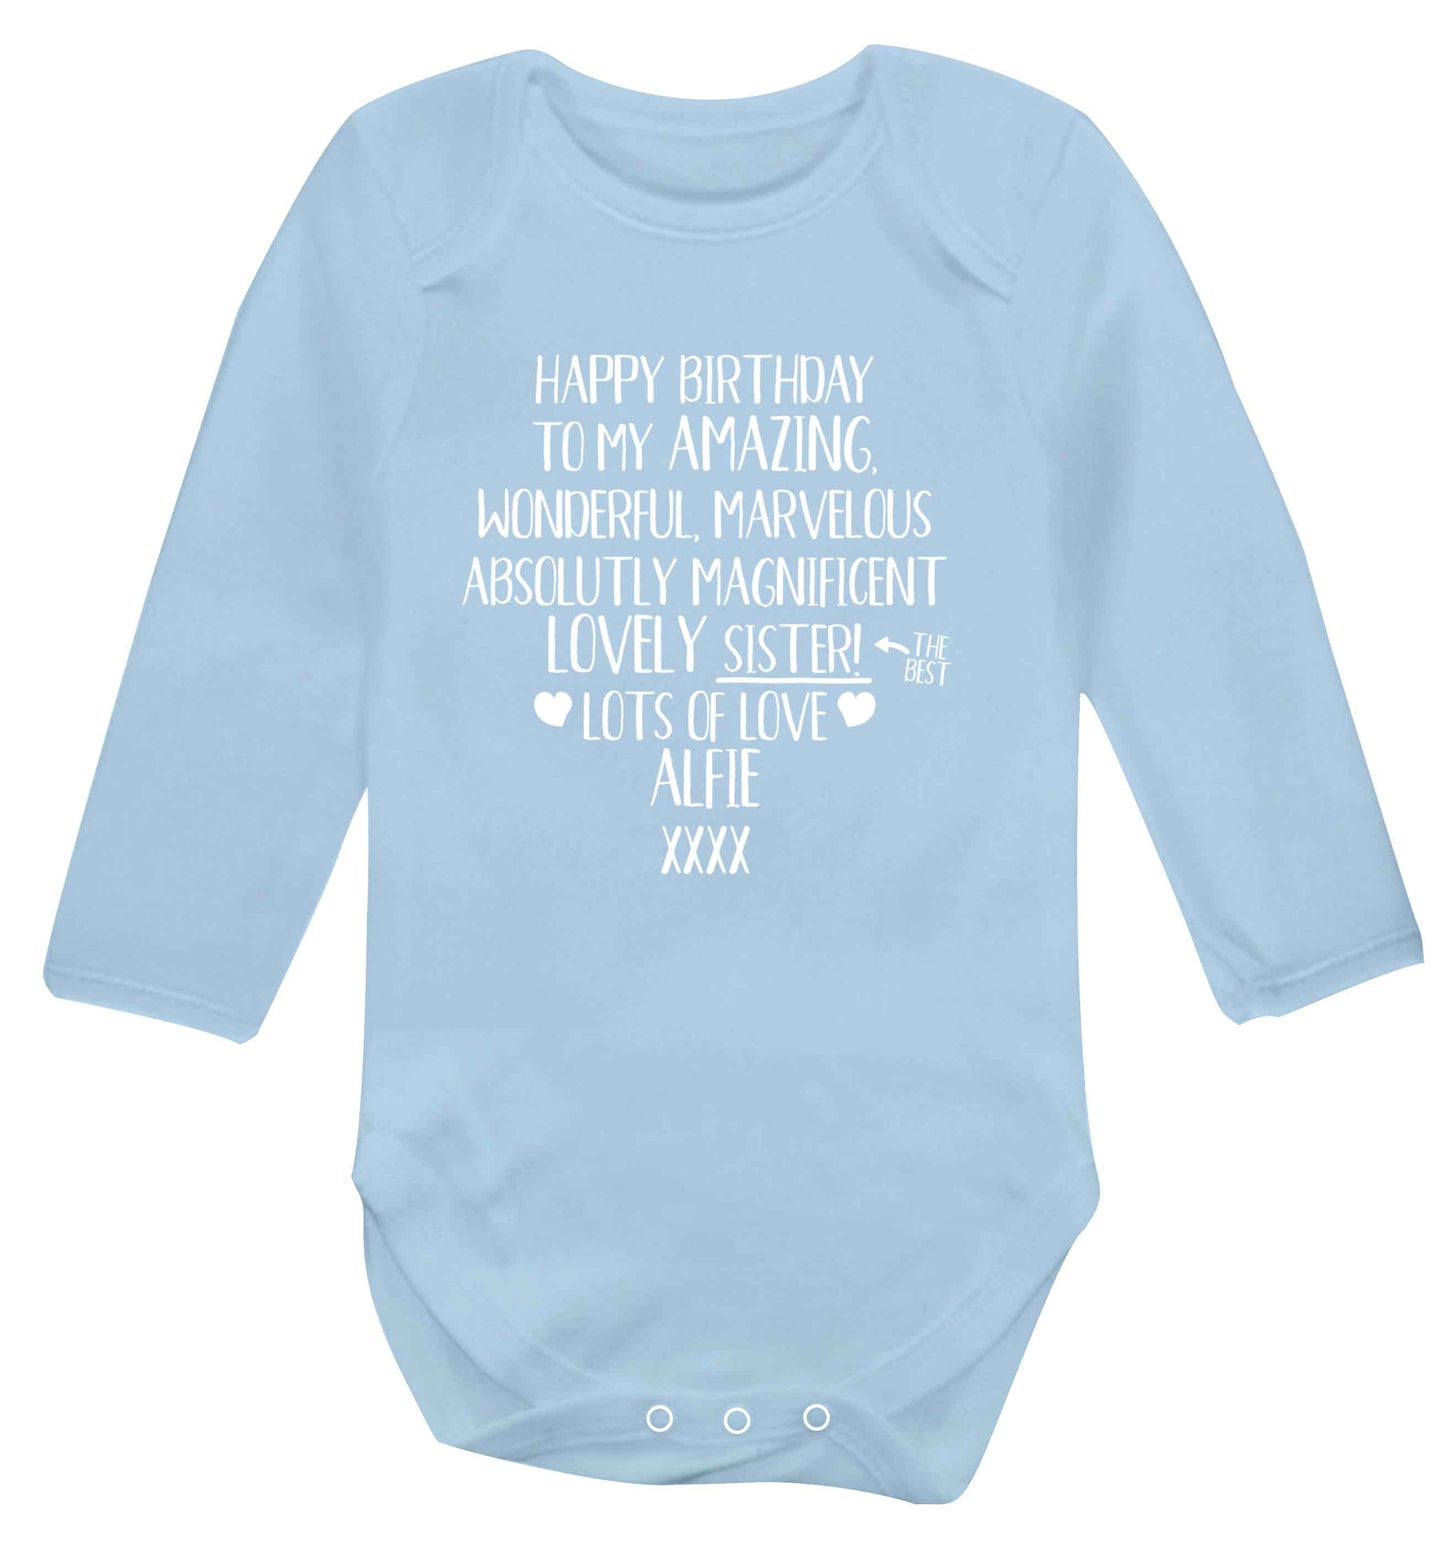 Personalised happy birthday to my amazing, wonderful, lovely sister Baby Vest long sleeved pale blue 6-12 months